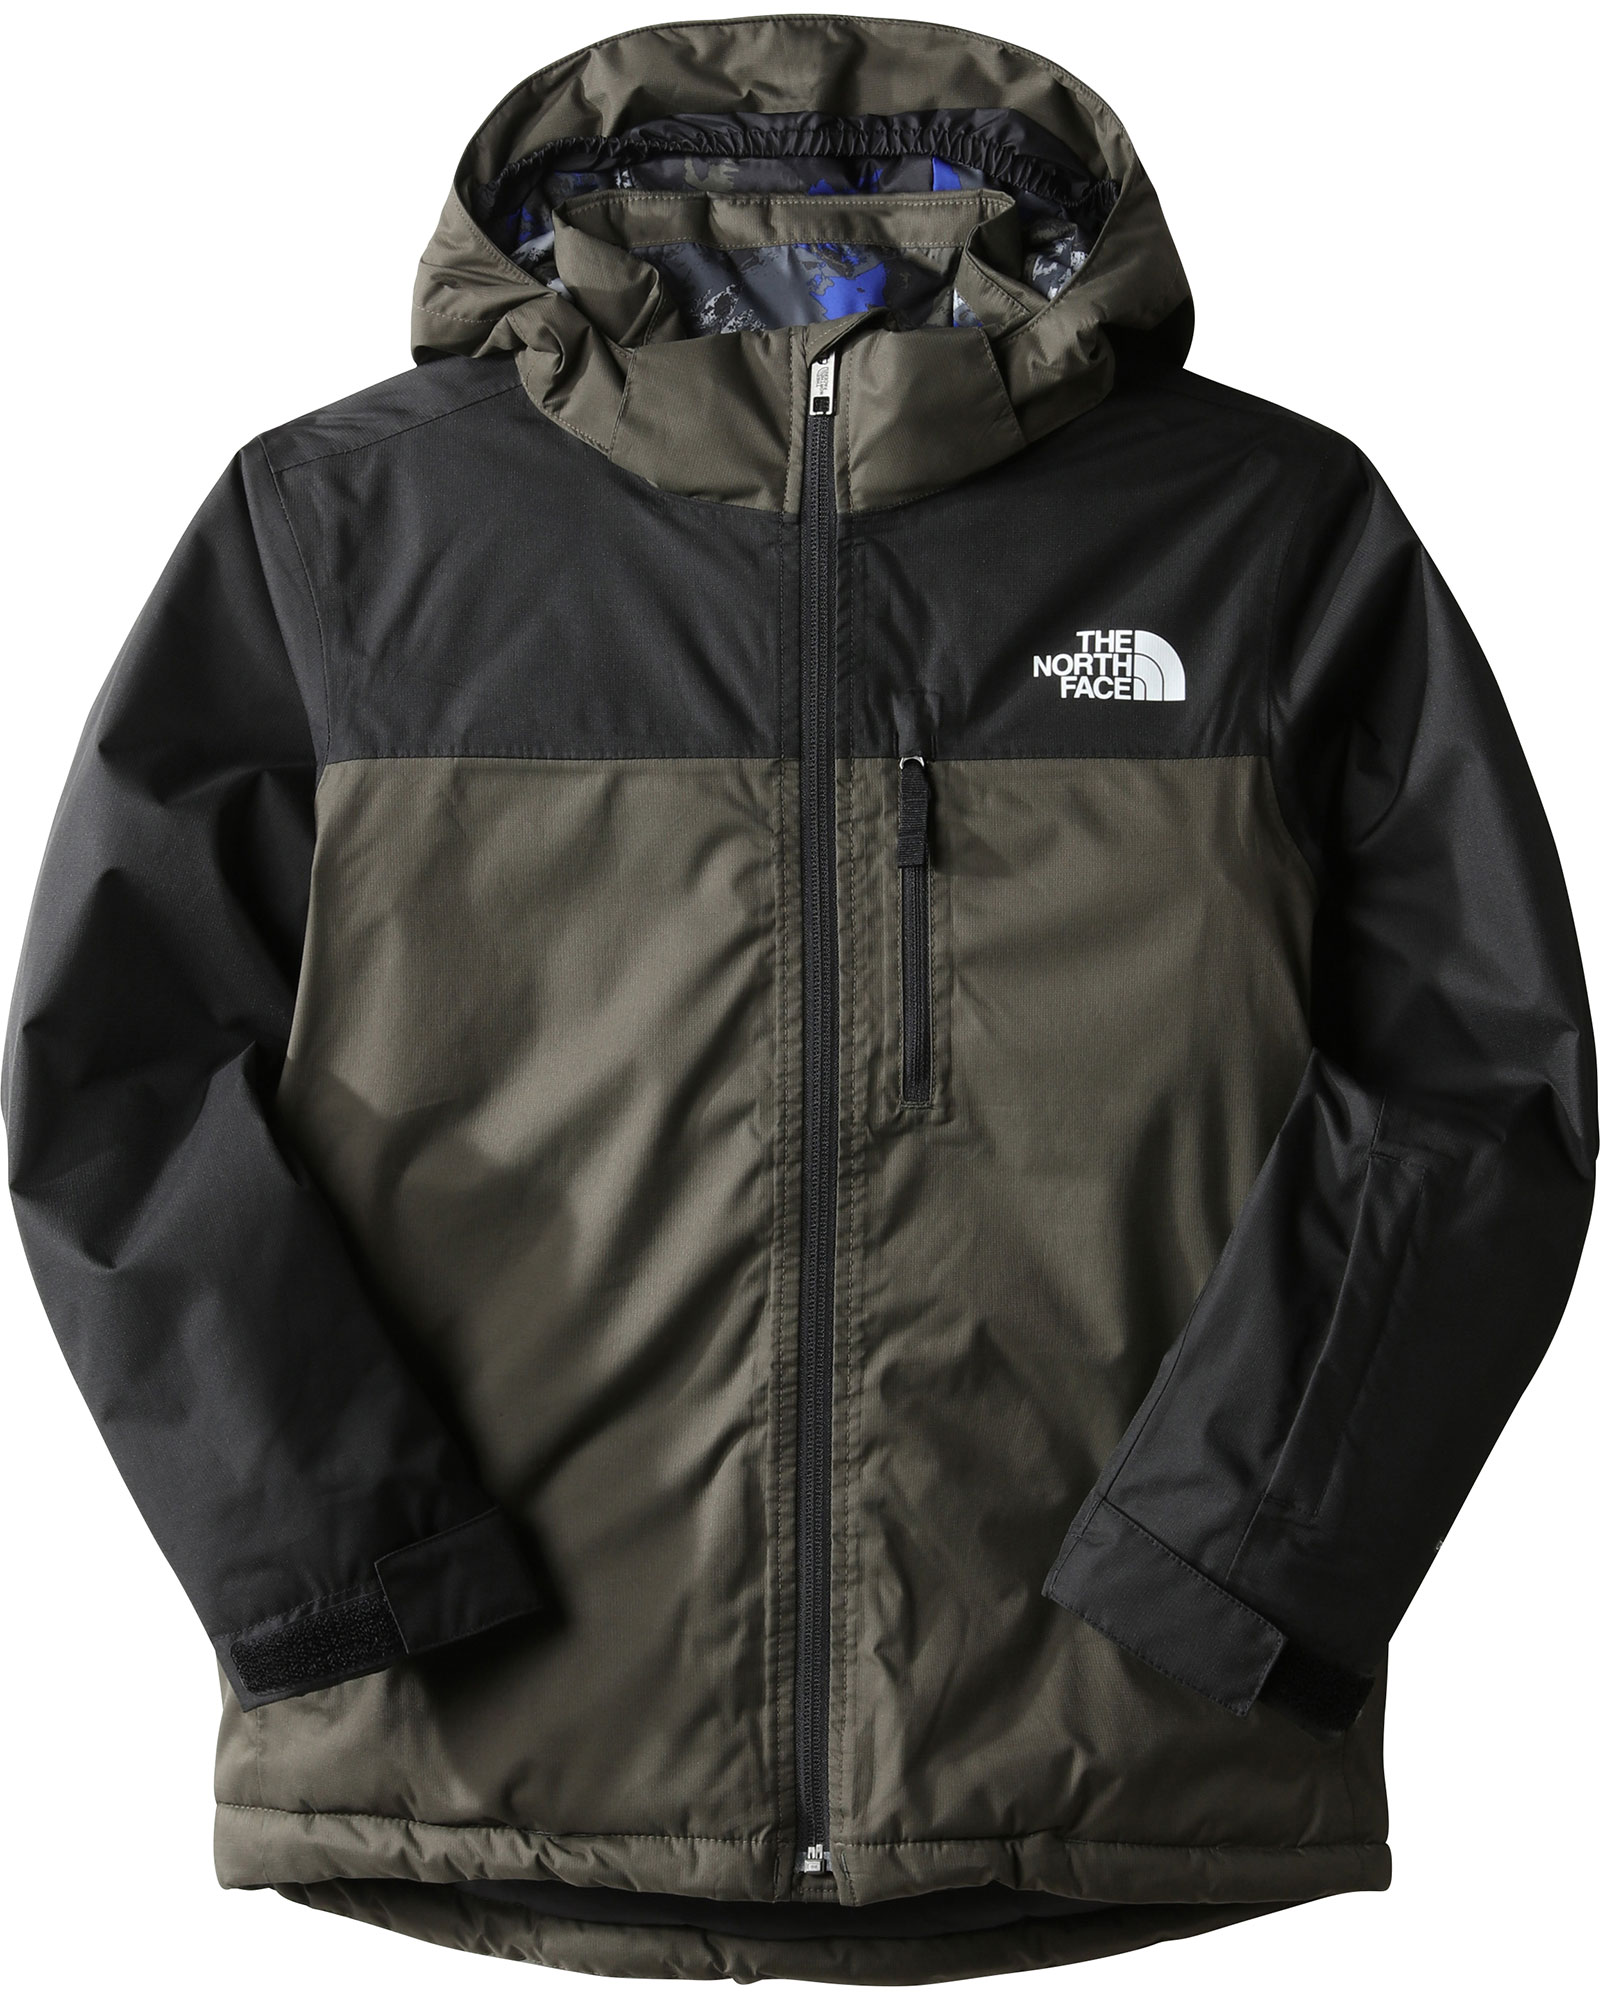 The North Face Teen Snowquest Plus Kids Insulated Jacket